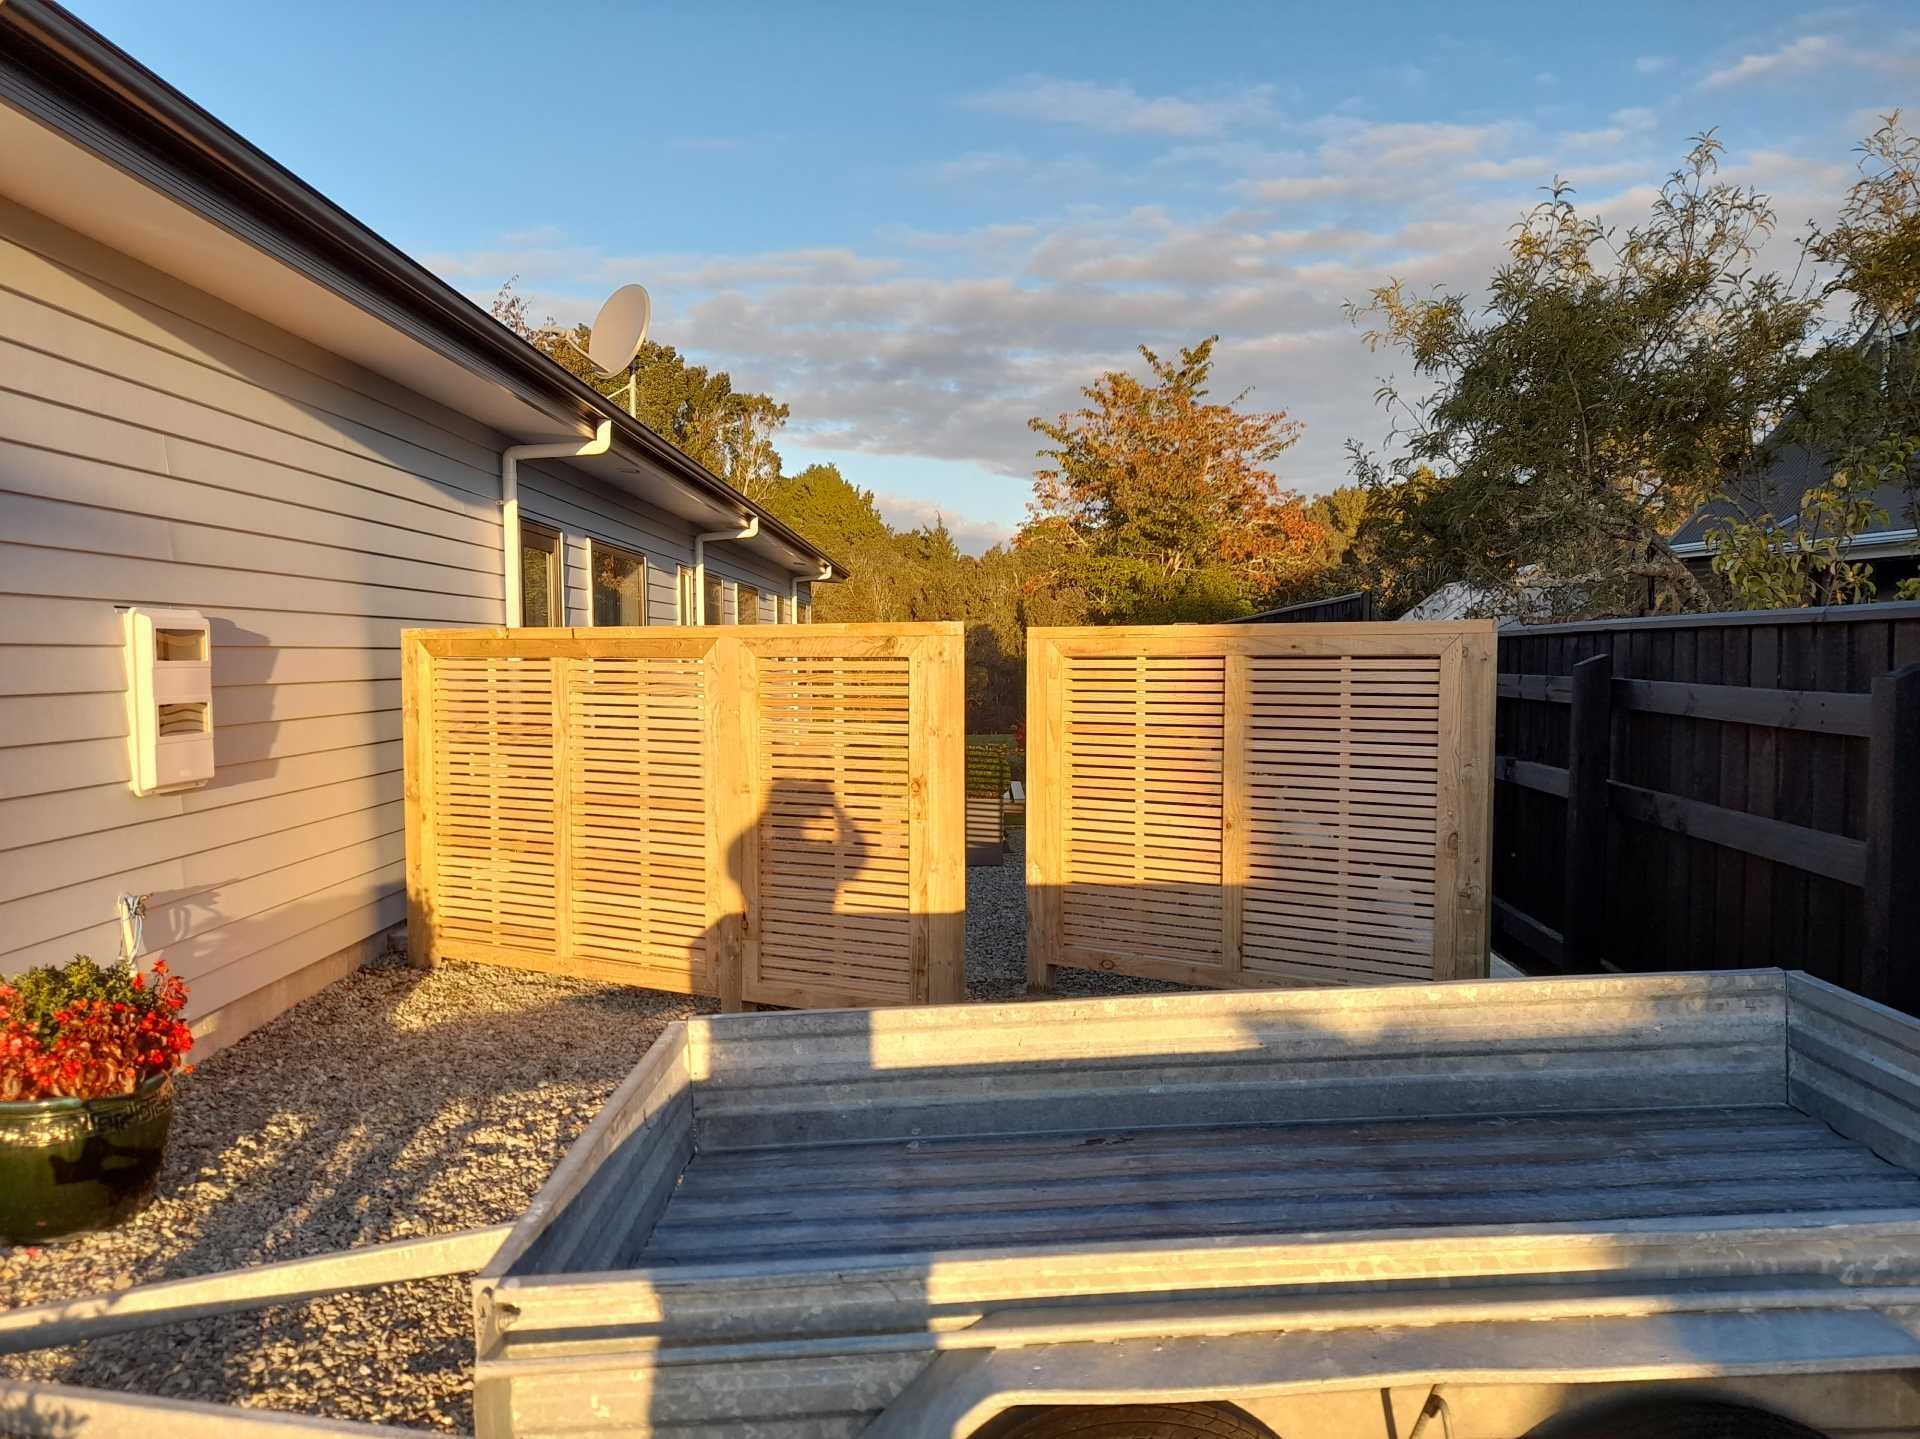 Privacy slatted fence